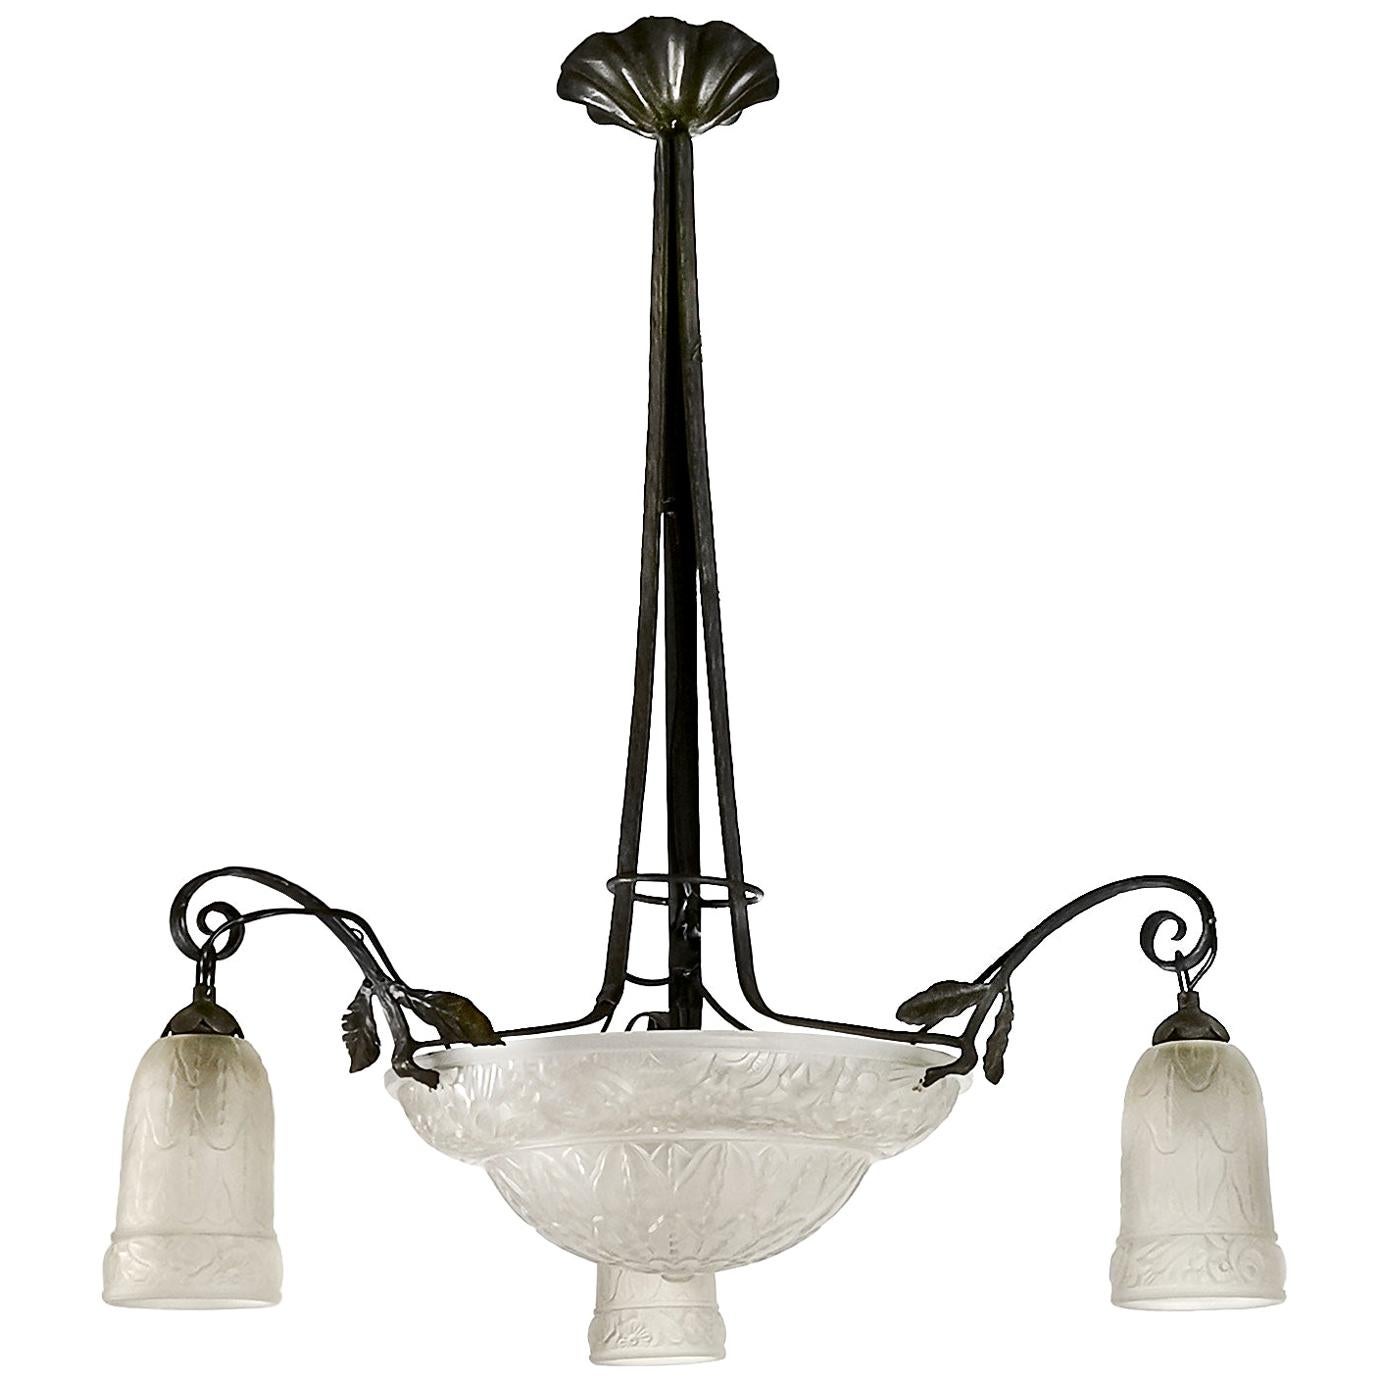 1925 Art Deco Chandelier, Wrought Iron, Pressed Glass, France